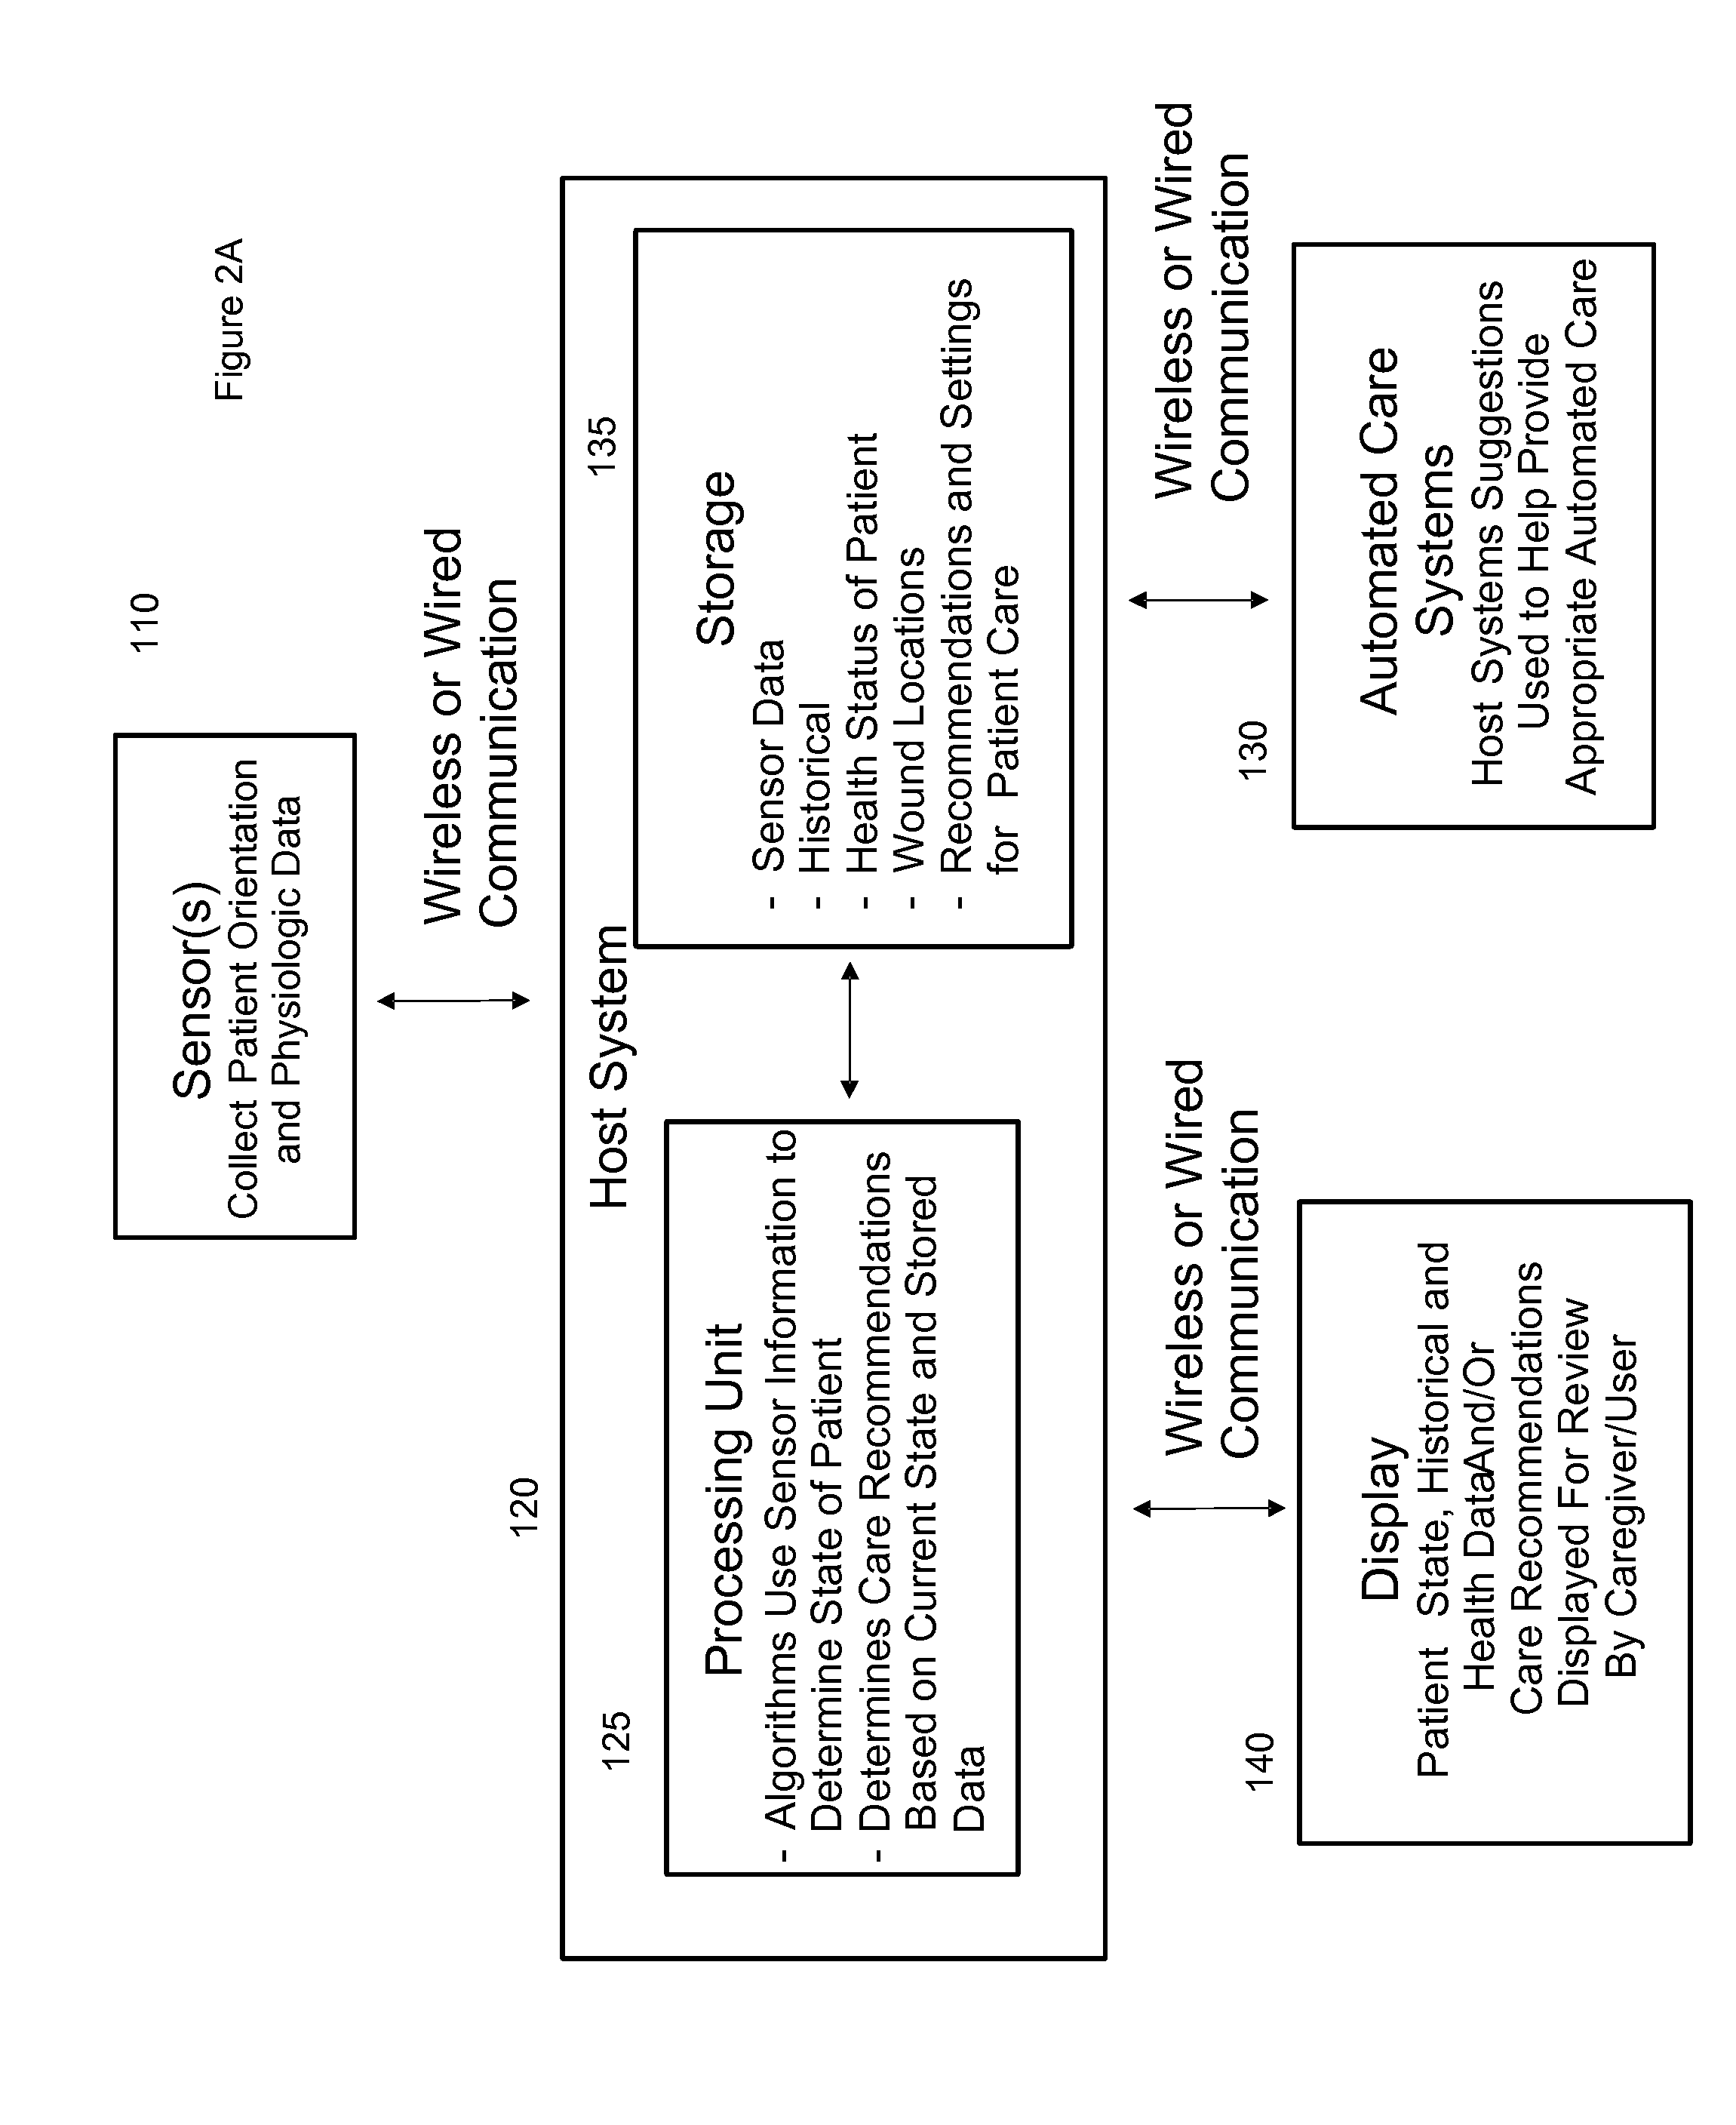 Systems, devices and methods for preventing, detecting and treating pressure-induced ischemia, pressure ulcers, and other conditions